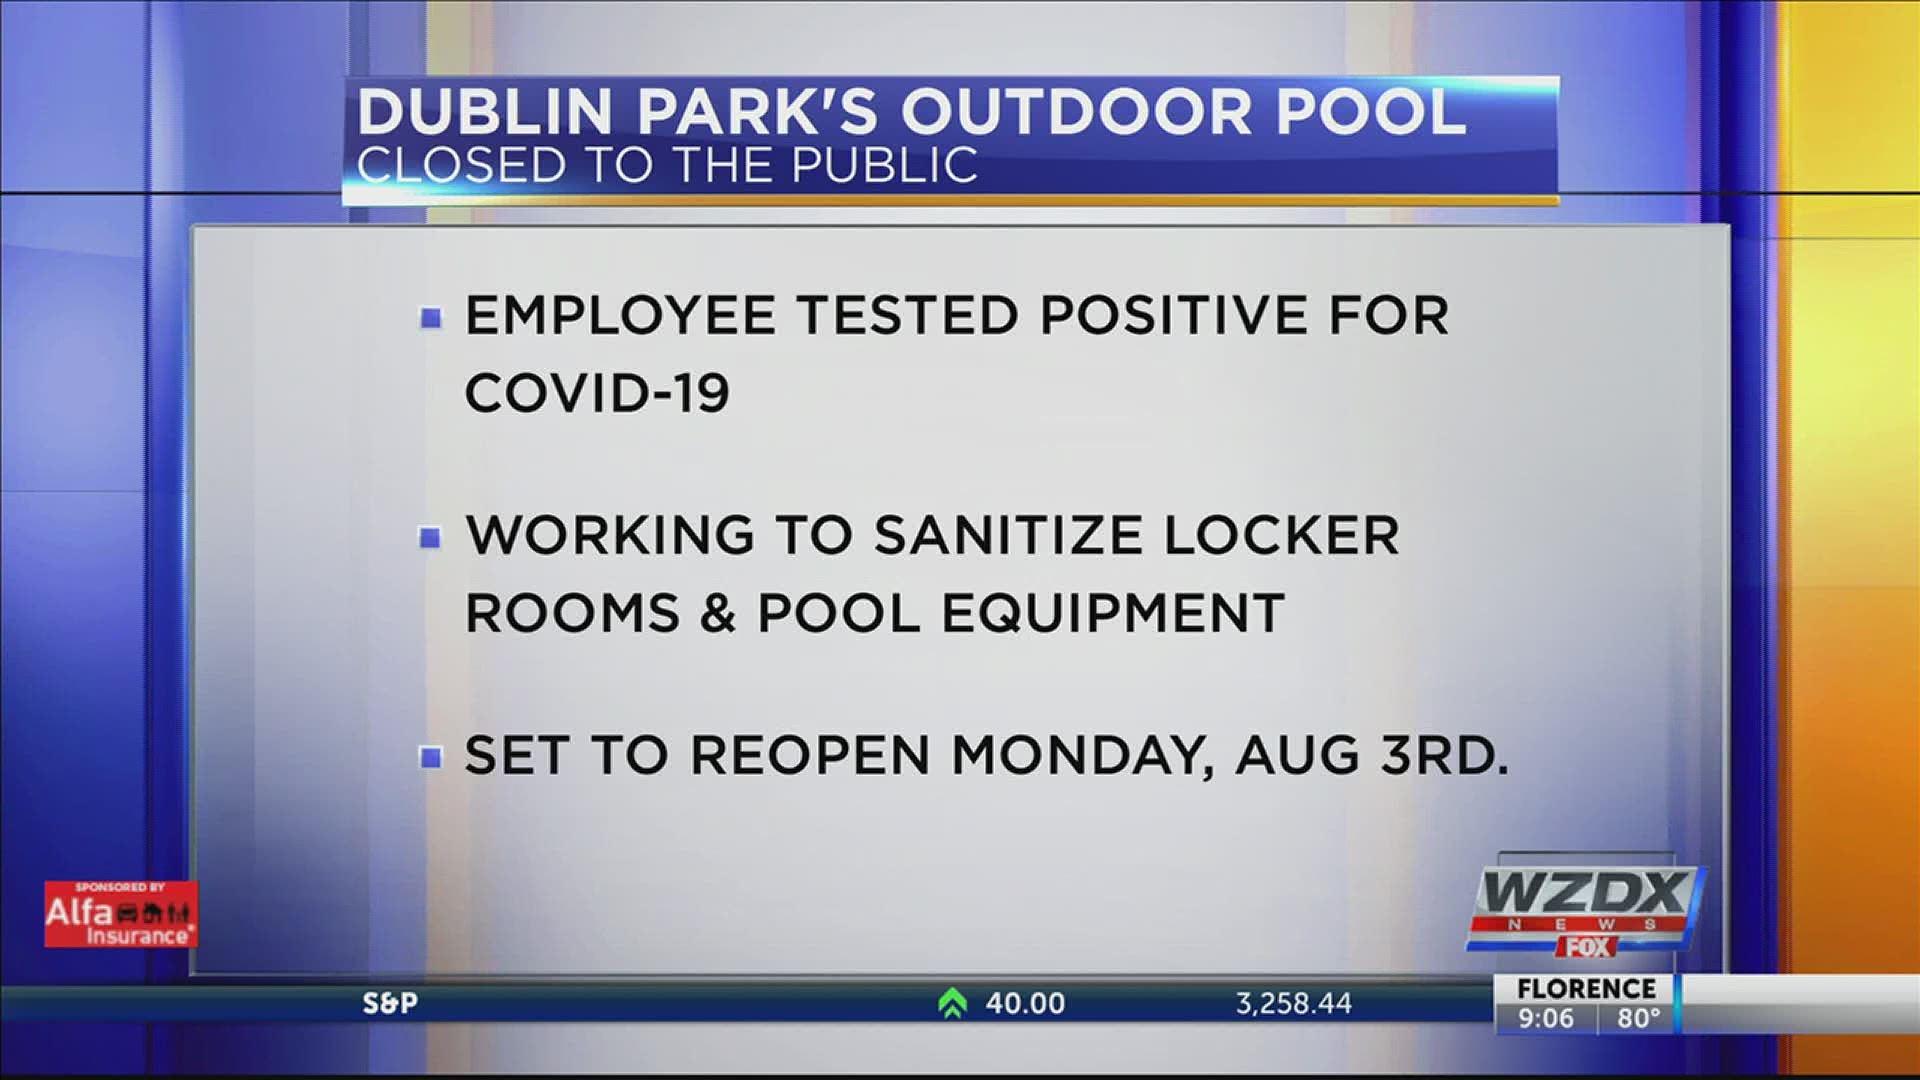 The pool has temporarily closed due to an employee testing positive for COVID-19.